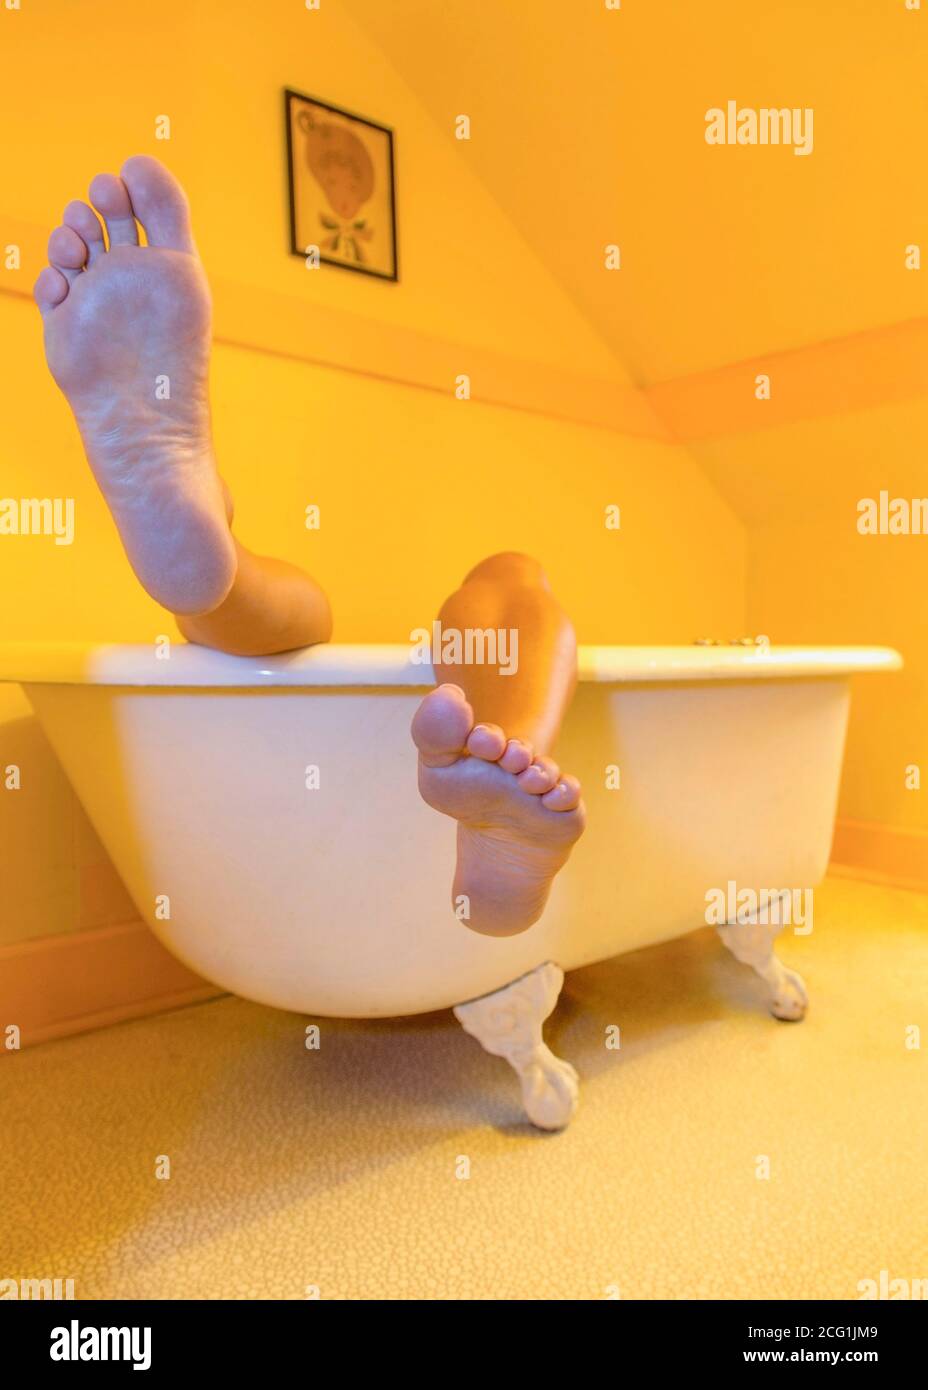 Legs and feet sticking up out of a retro style claw-foot bathtub Stock Photo